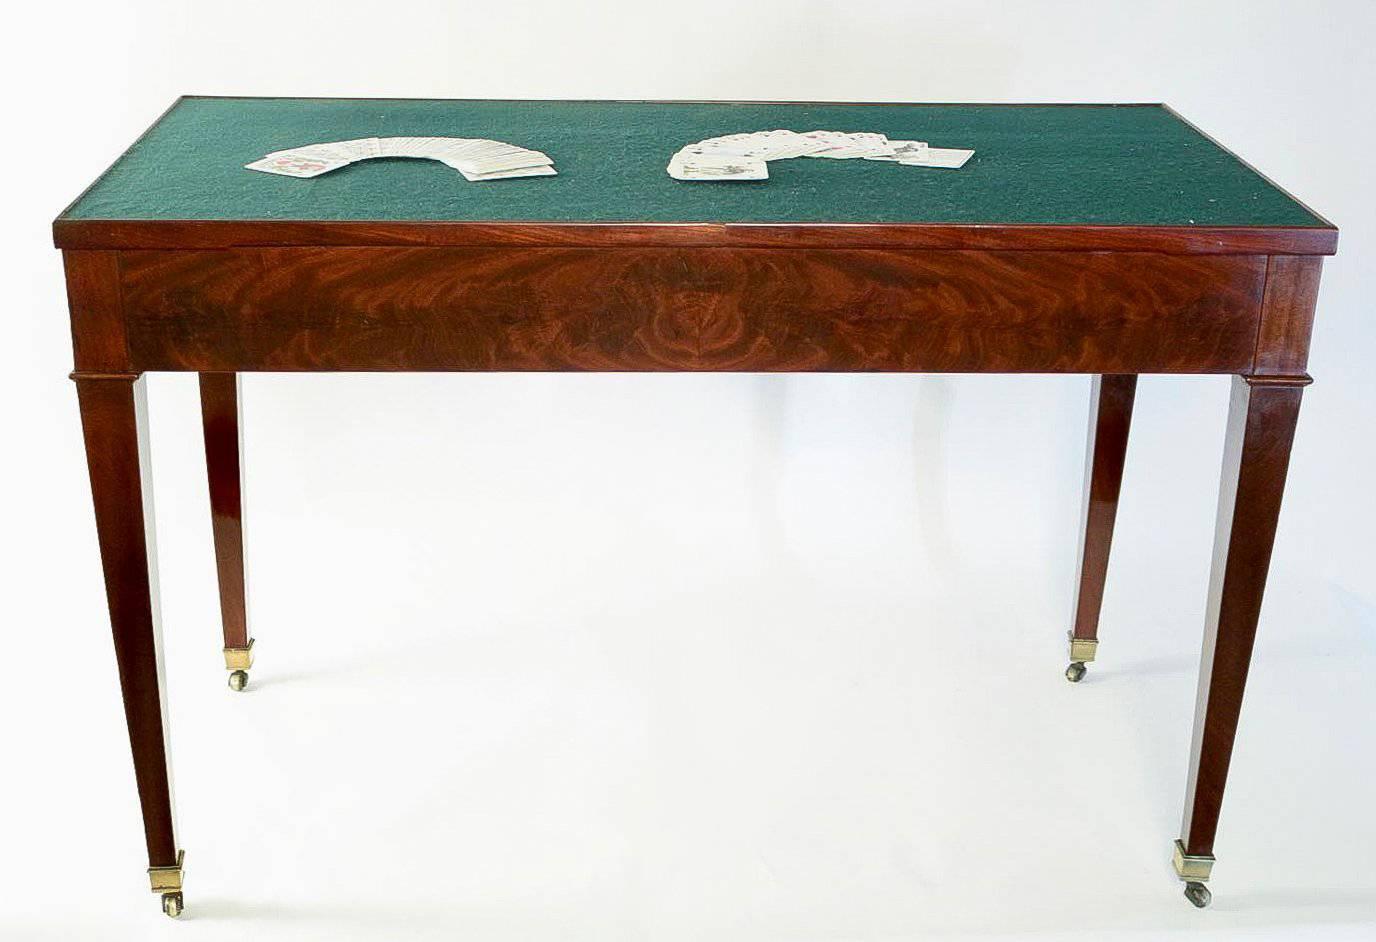 18th Century Jacob Freres Rue Meslée French Directoire Period Reversible Desk and Tric-Trac